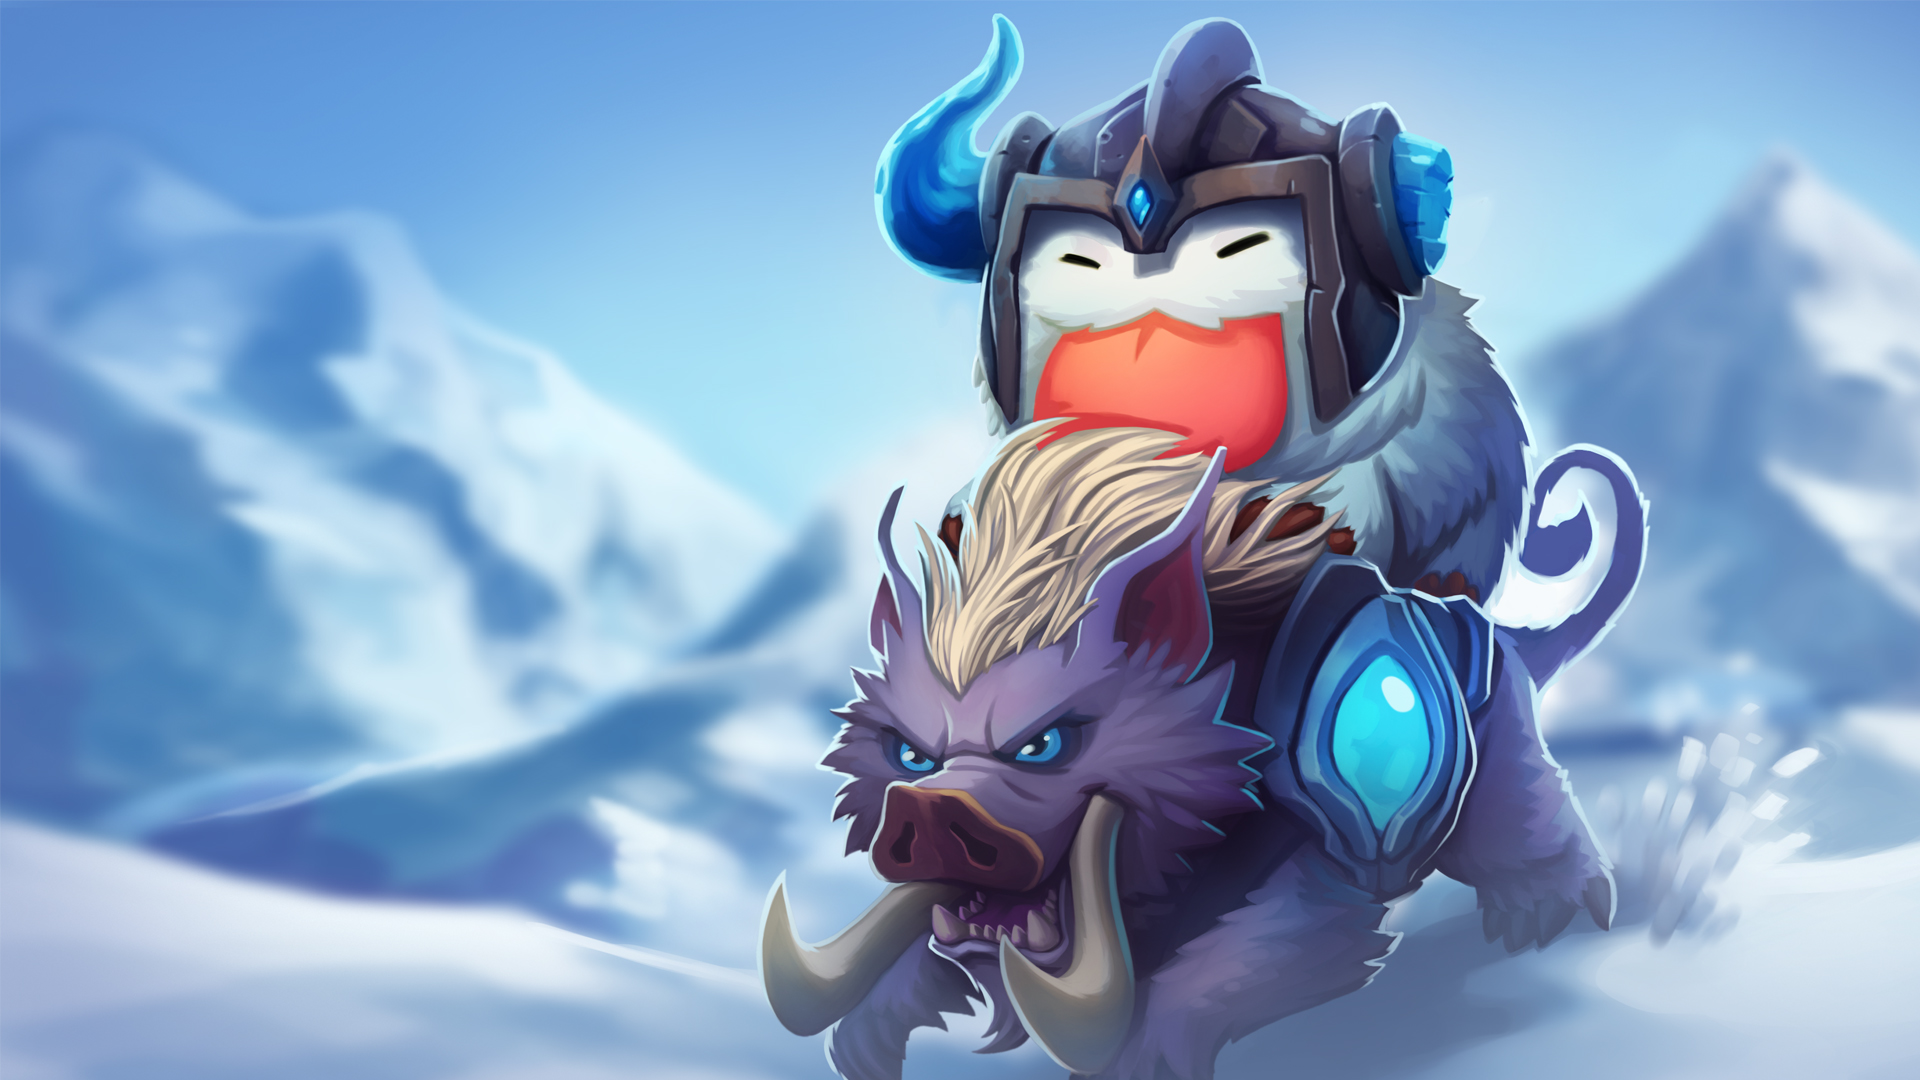 Nothing found for 2015 02 17 Champion Poros Wallpapers For Fiesta De